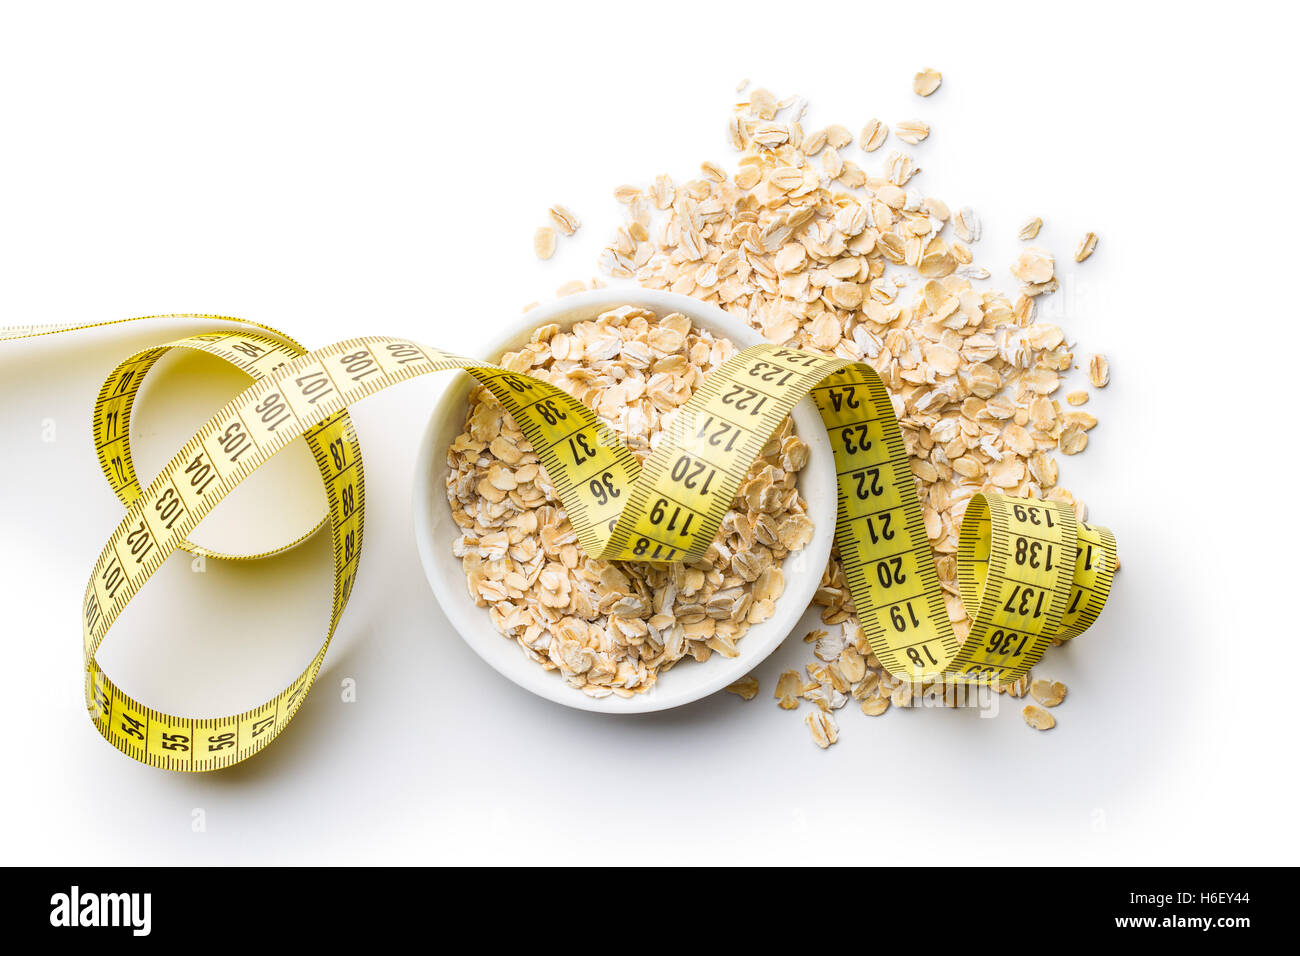 Diet concept. Oatmeal and measuring tape isolated on white background. Stock Photo